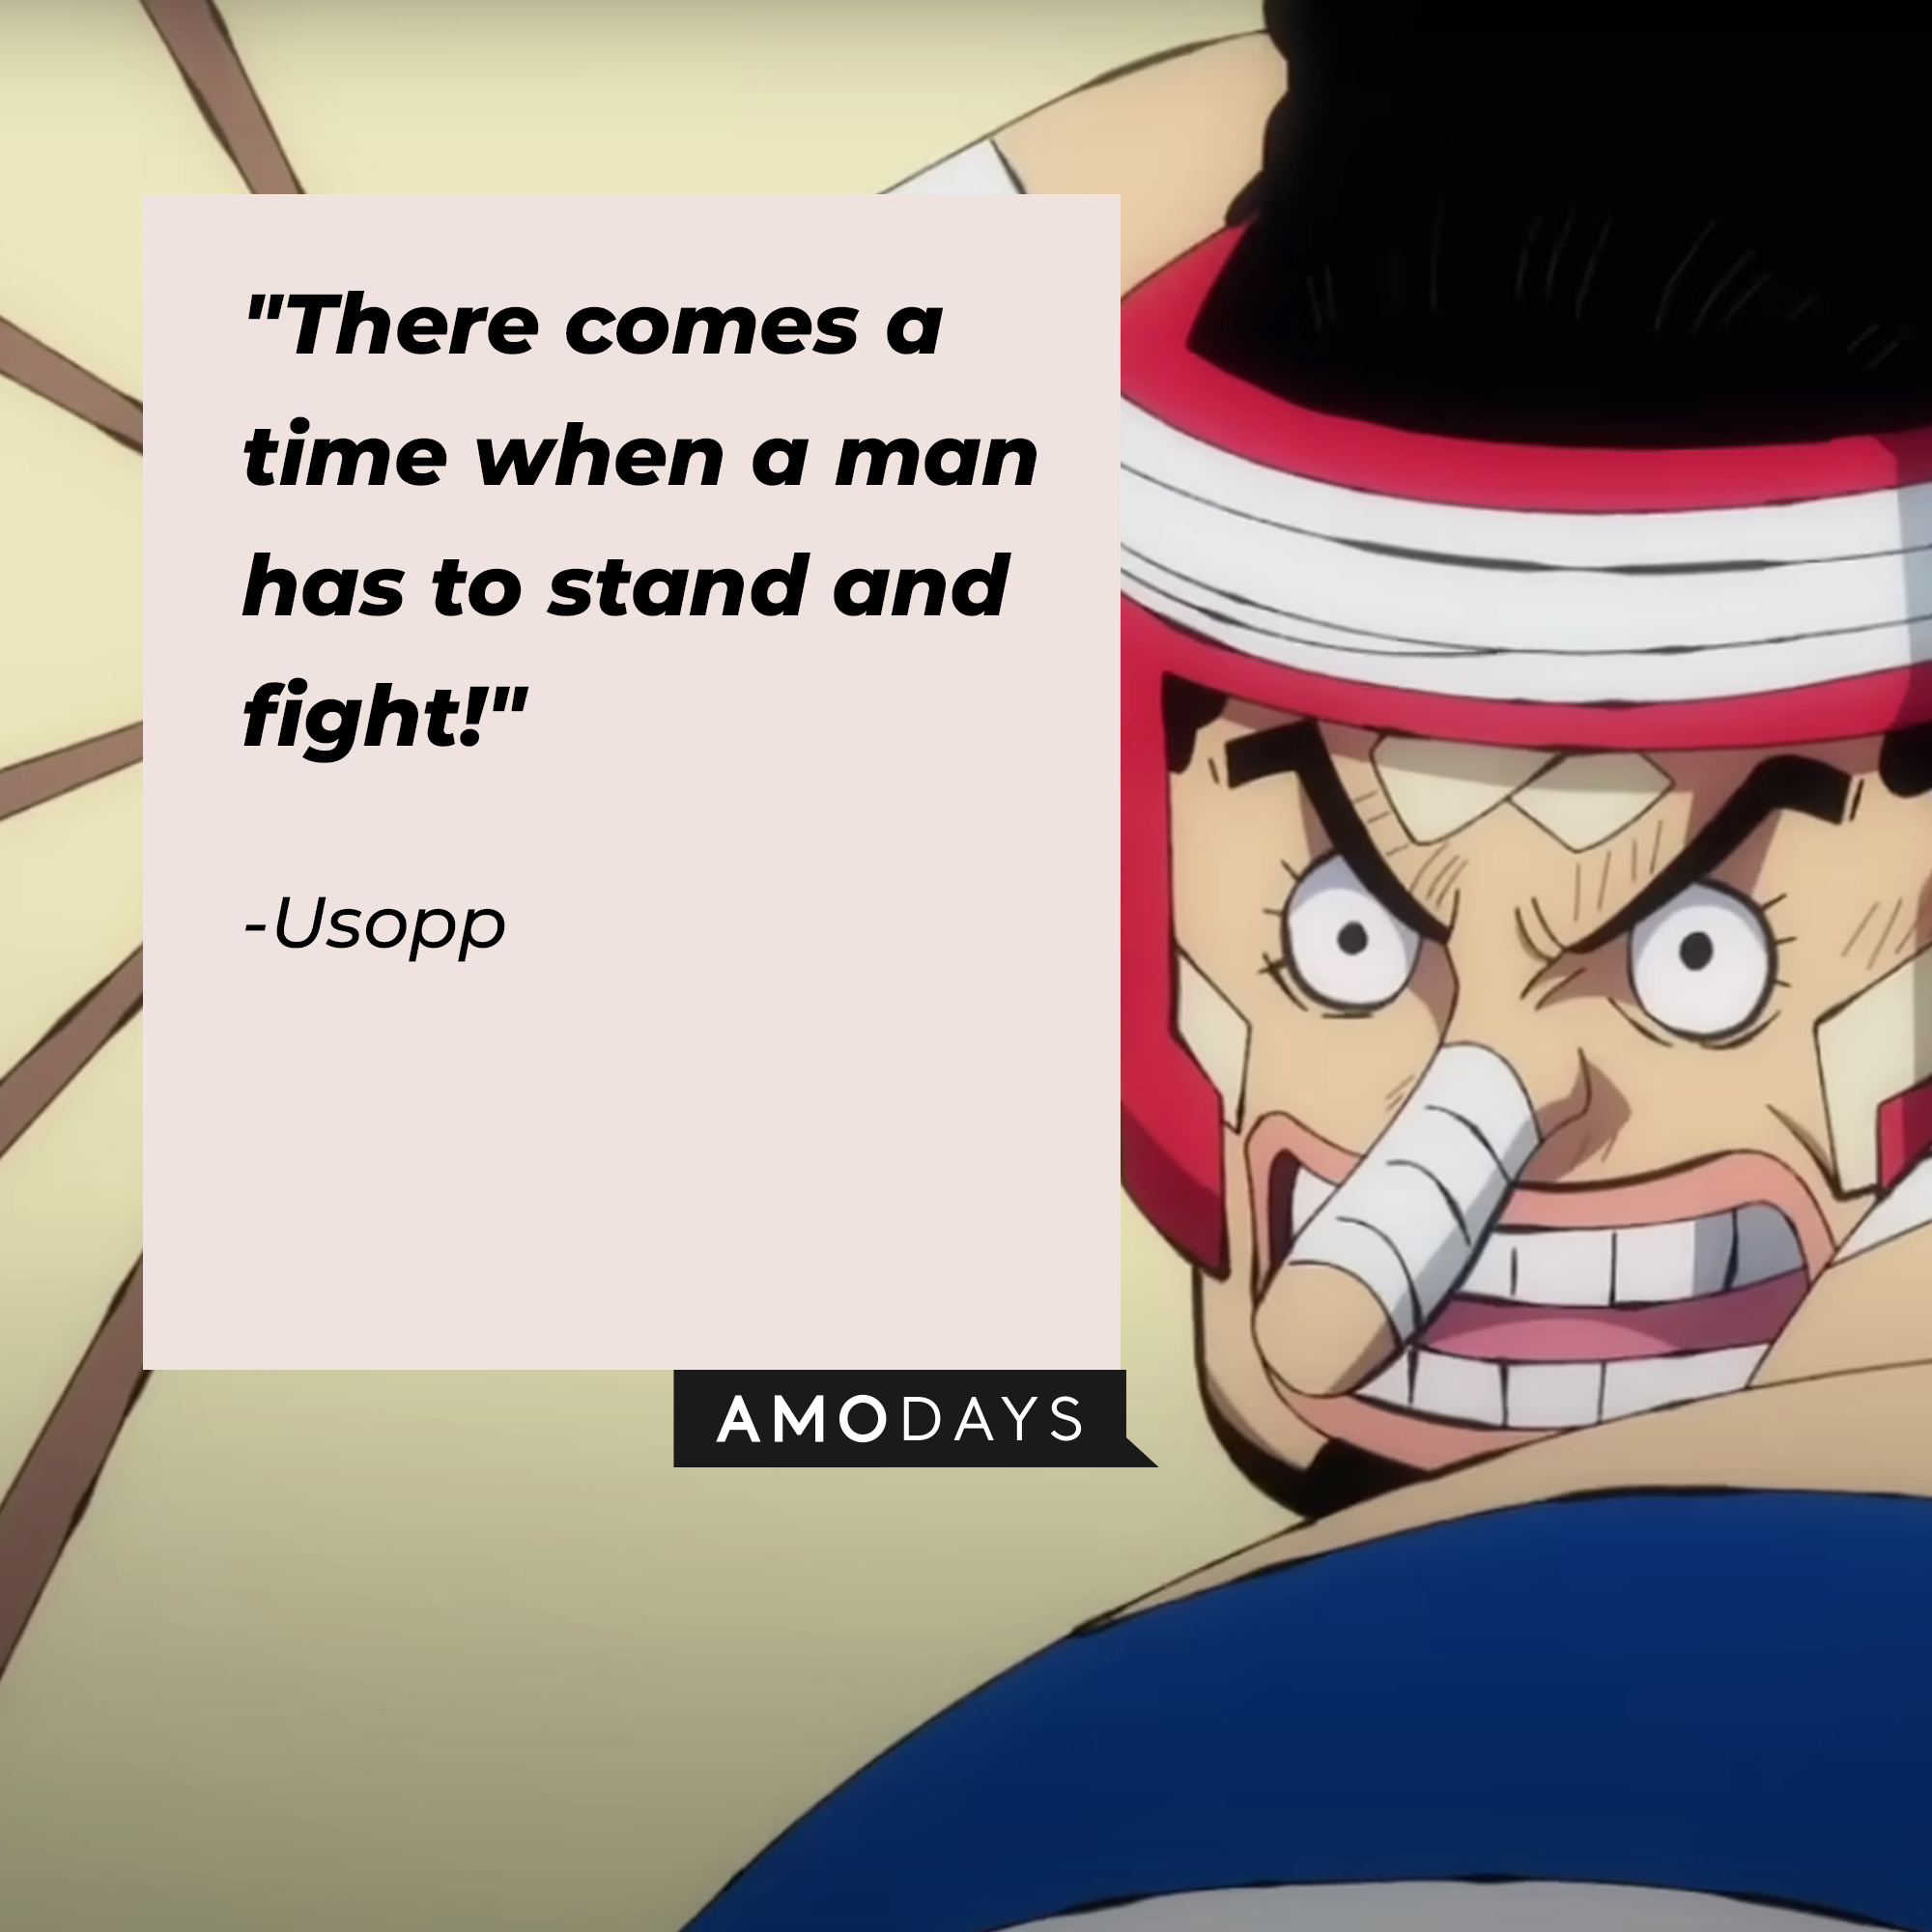 Usopp, with his quote: “There comes a time when a man has to stand and fight!” |  Source:  facebook.com/onepieceofficial